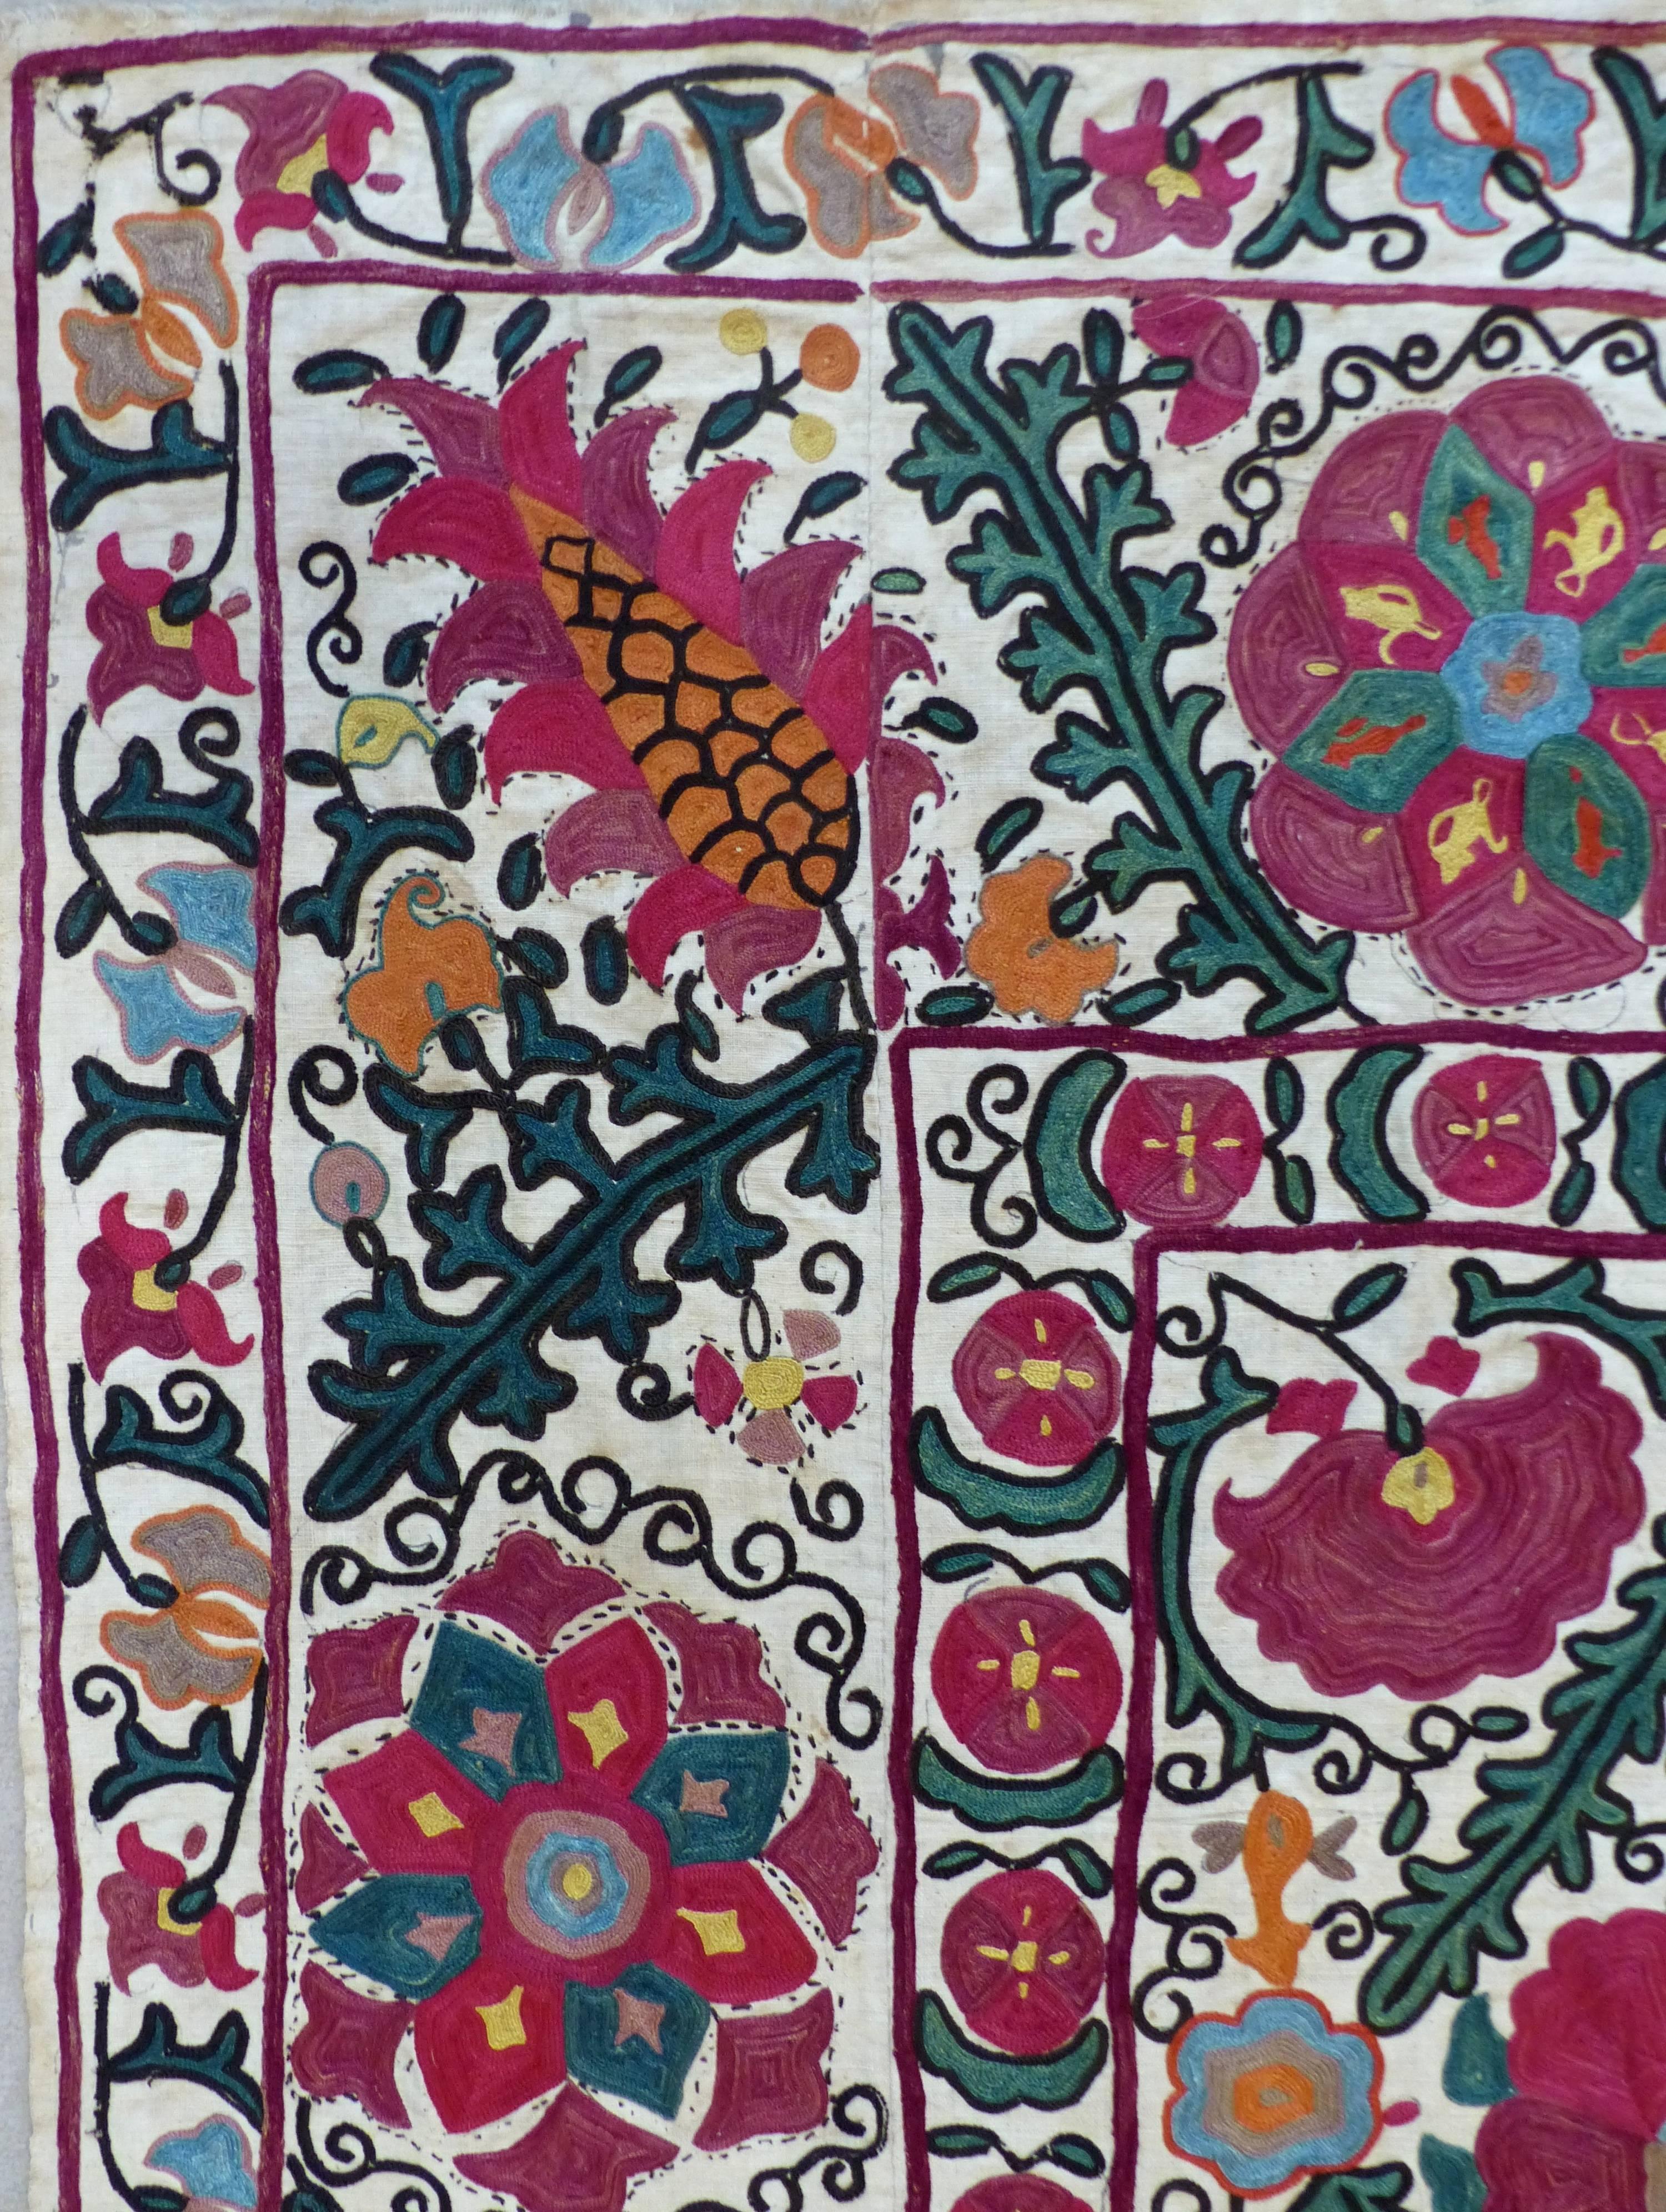 Hand-Woven Suzani Antique Embroidery from Central Asia